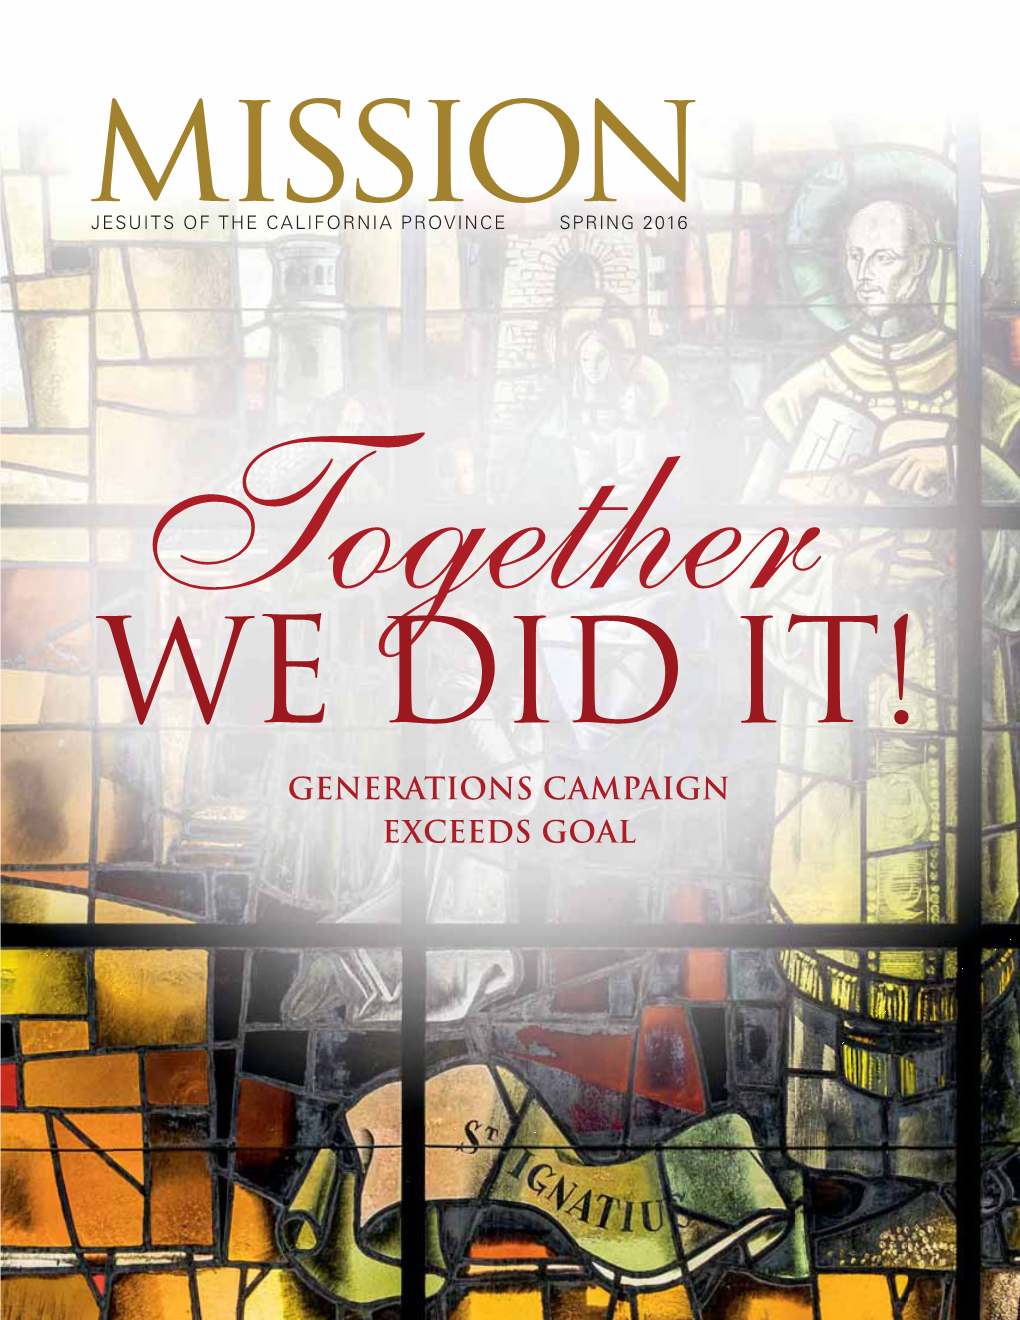 GENERATIONS CAMPAIGN EXCEEDS GOAL Inside 2 LETTER from the PROVINCIAL 6 in REMEMBRANCE